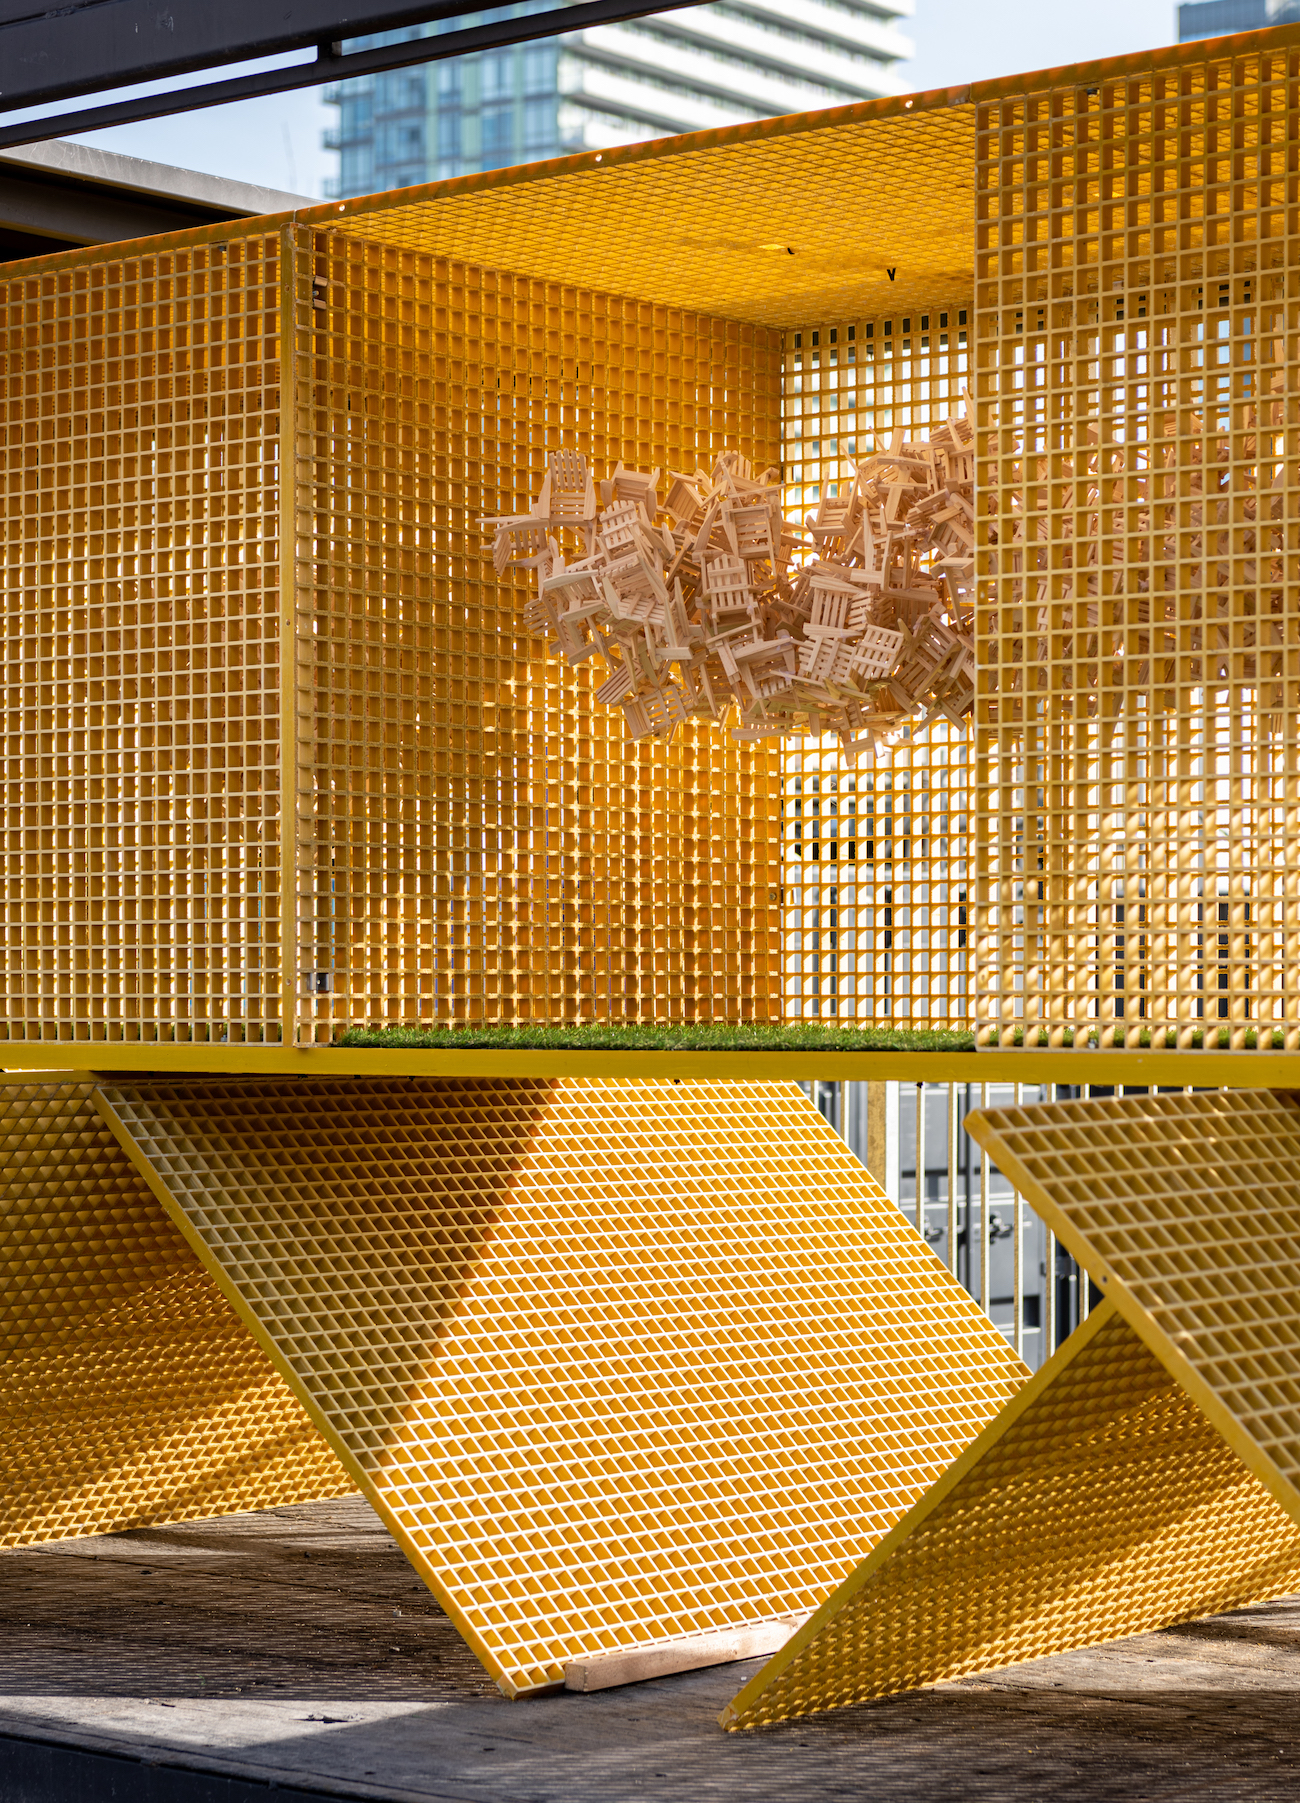 ‘Stackt Summer’ by StudioAC was commissioned as part of DesignTO. Photography by Jeremie Warshafsky.